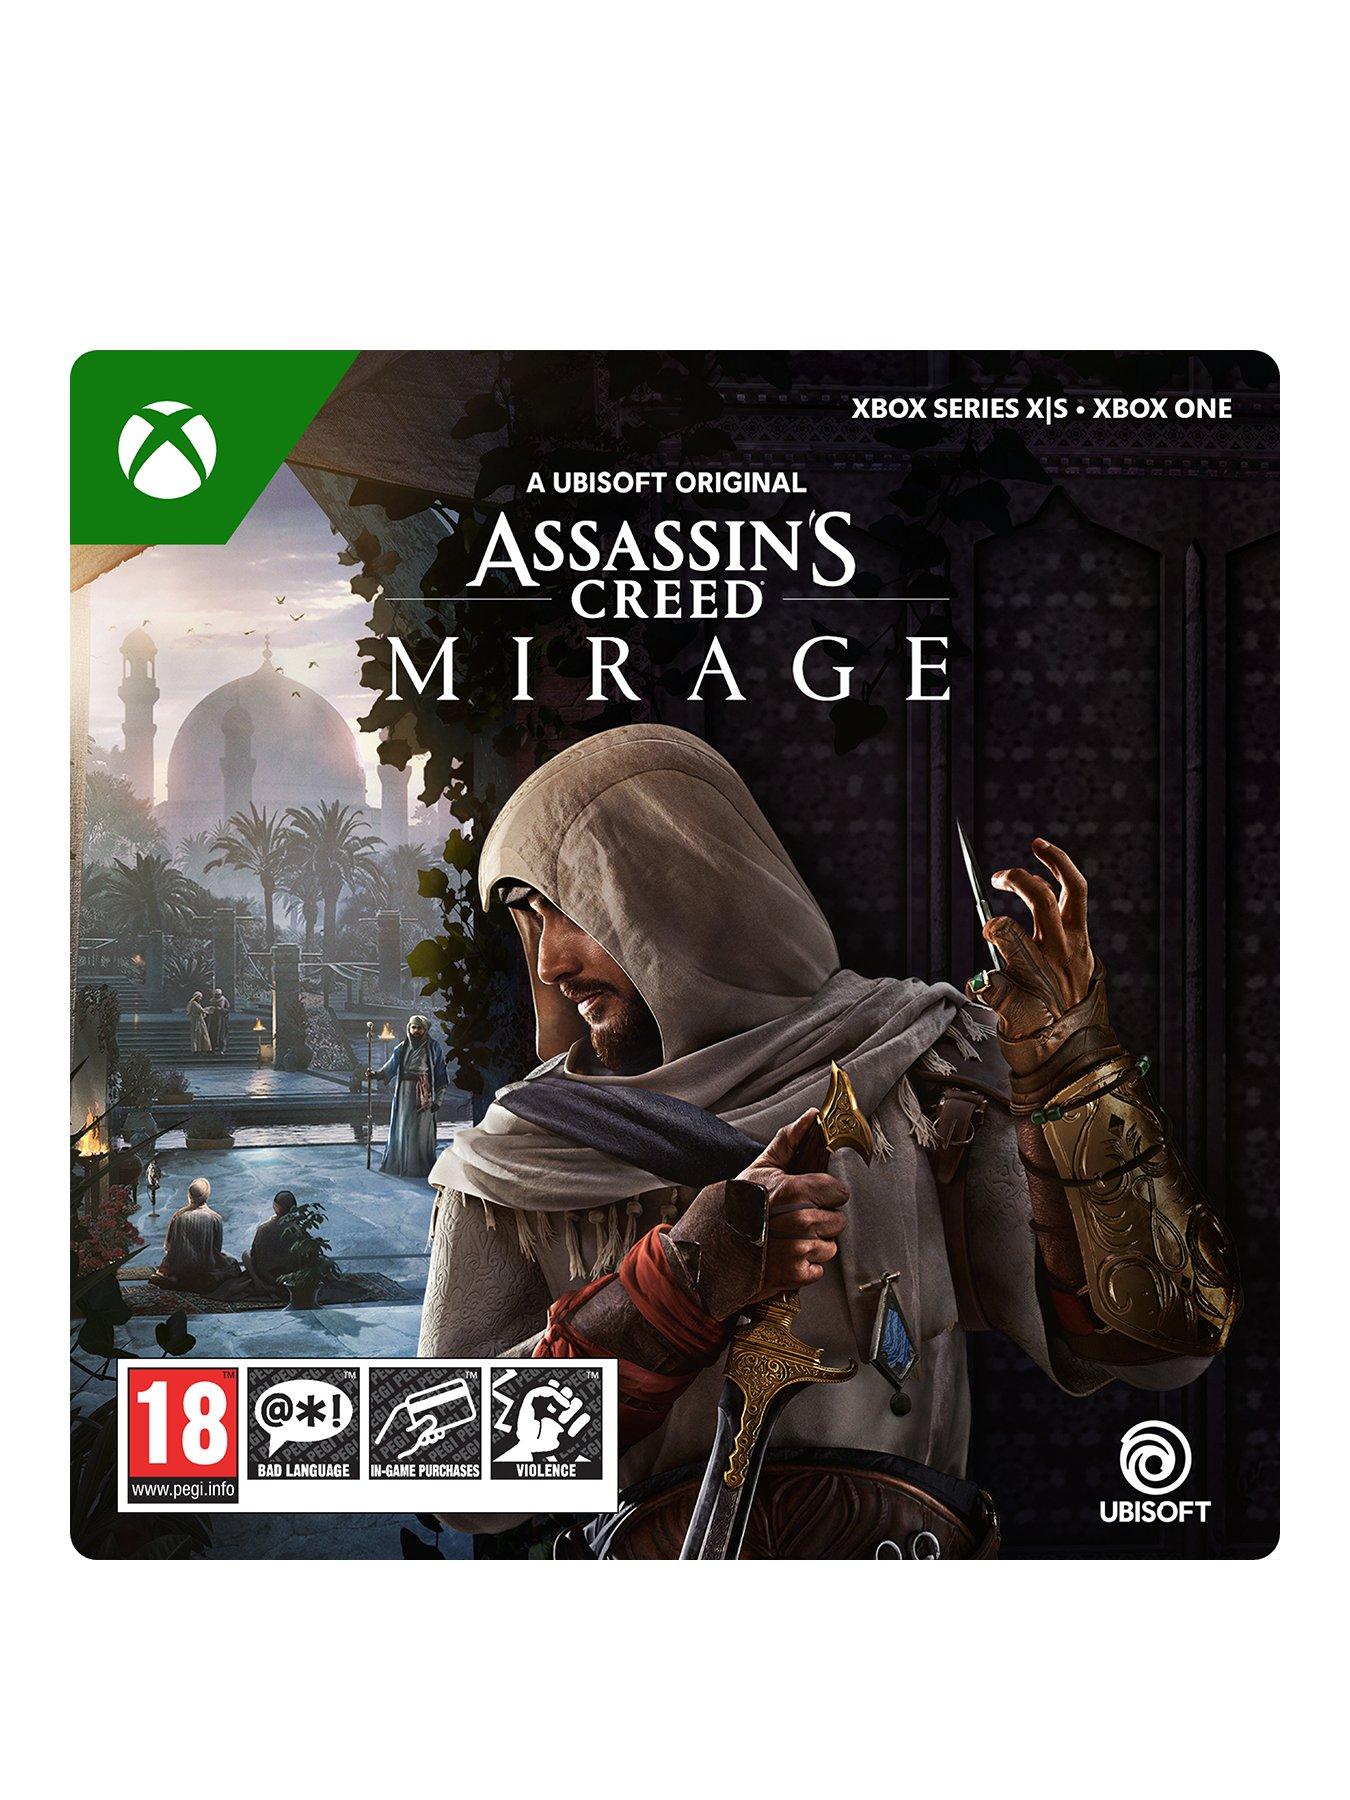 Download Xbox One Assassins Creed Mirage Deluxe Edition Xbox One Digital  Code